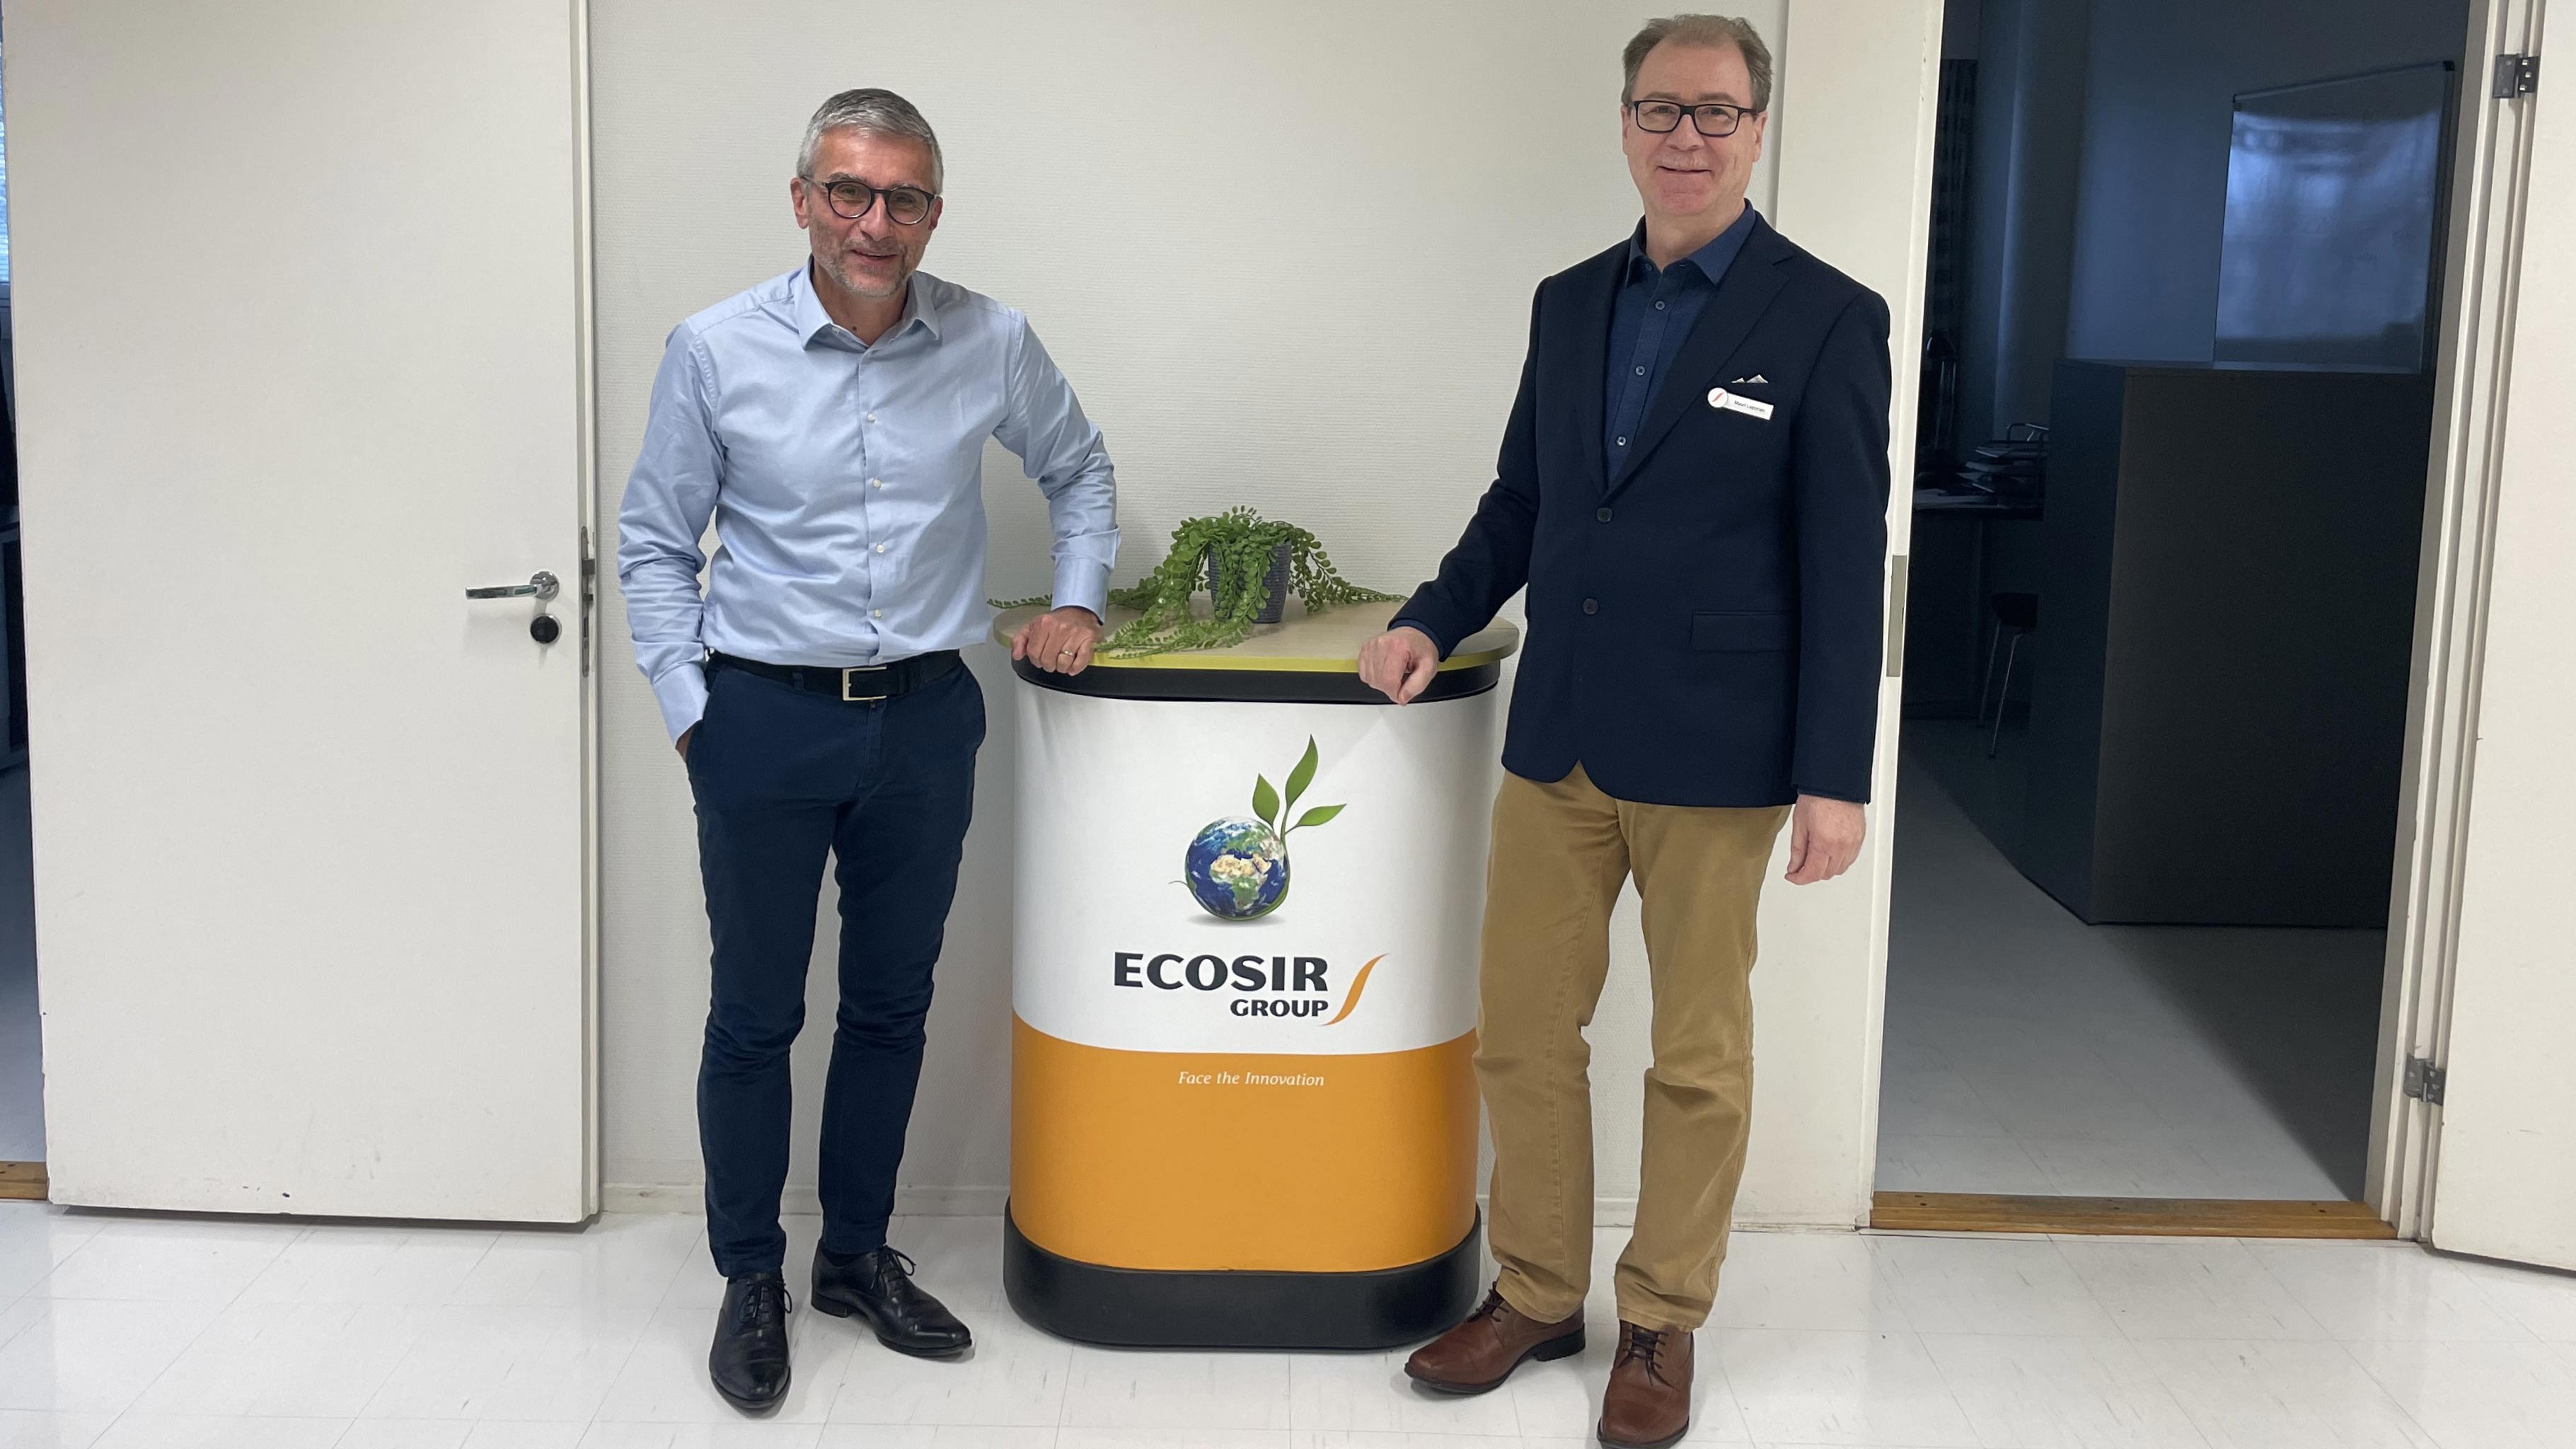 Christophe Vergne, Head of EMEA, Sales and Services of Swisslog Healthcare and Mauri Leponen, CEO of Ecosir